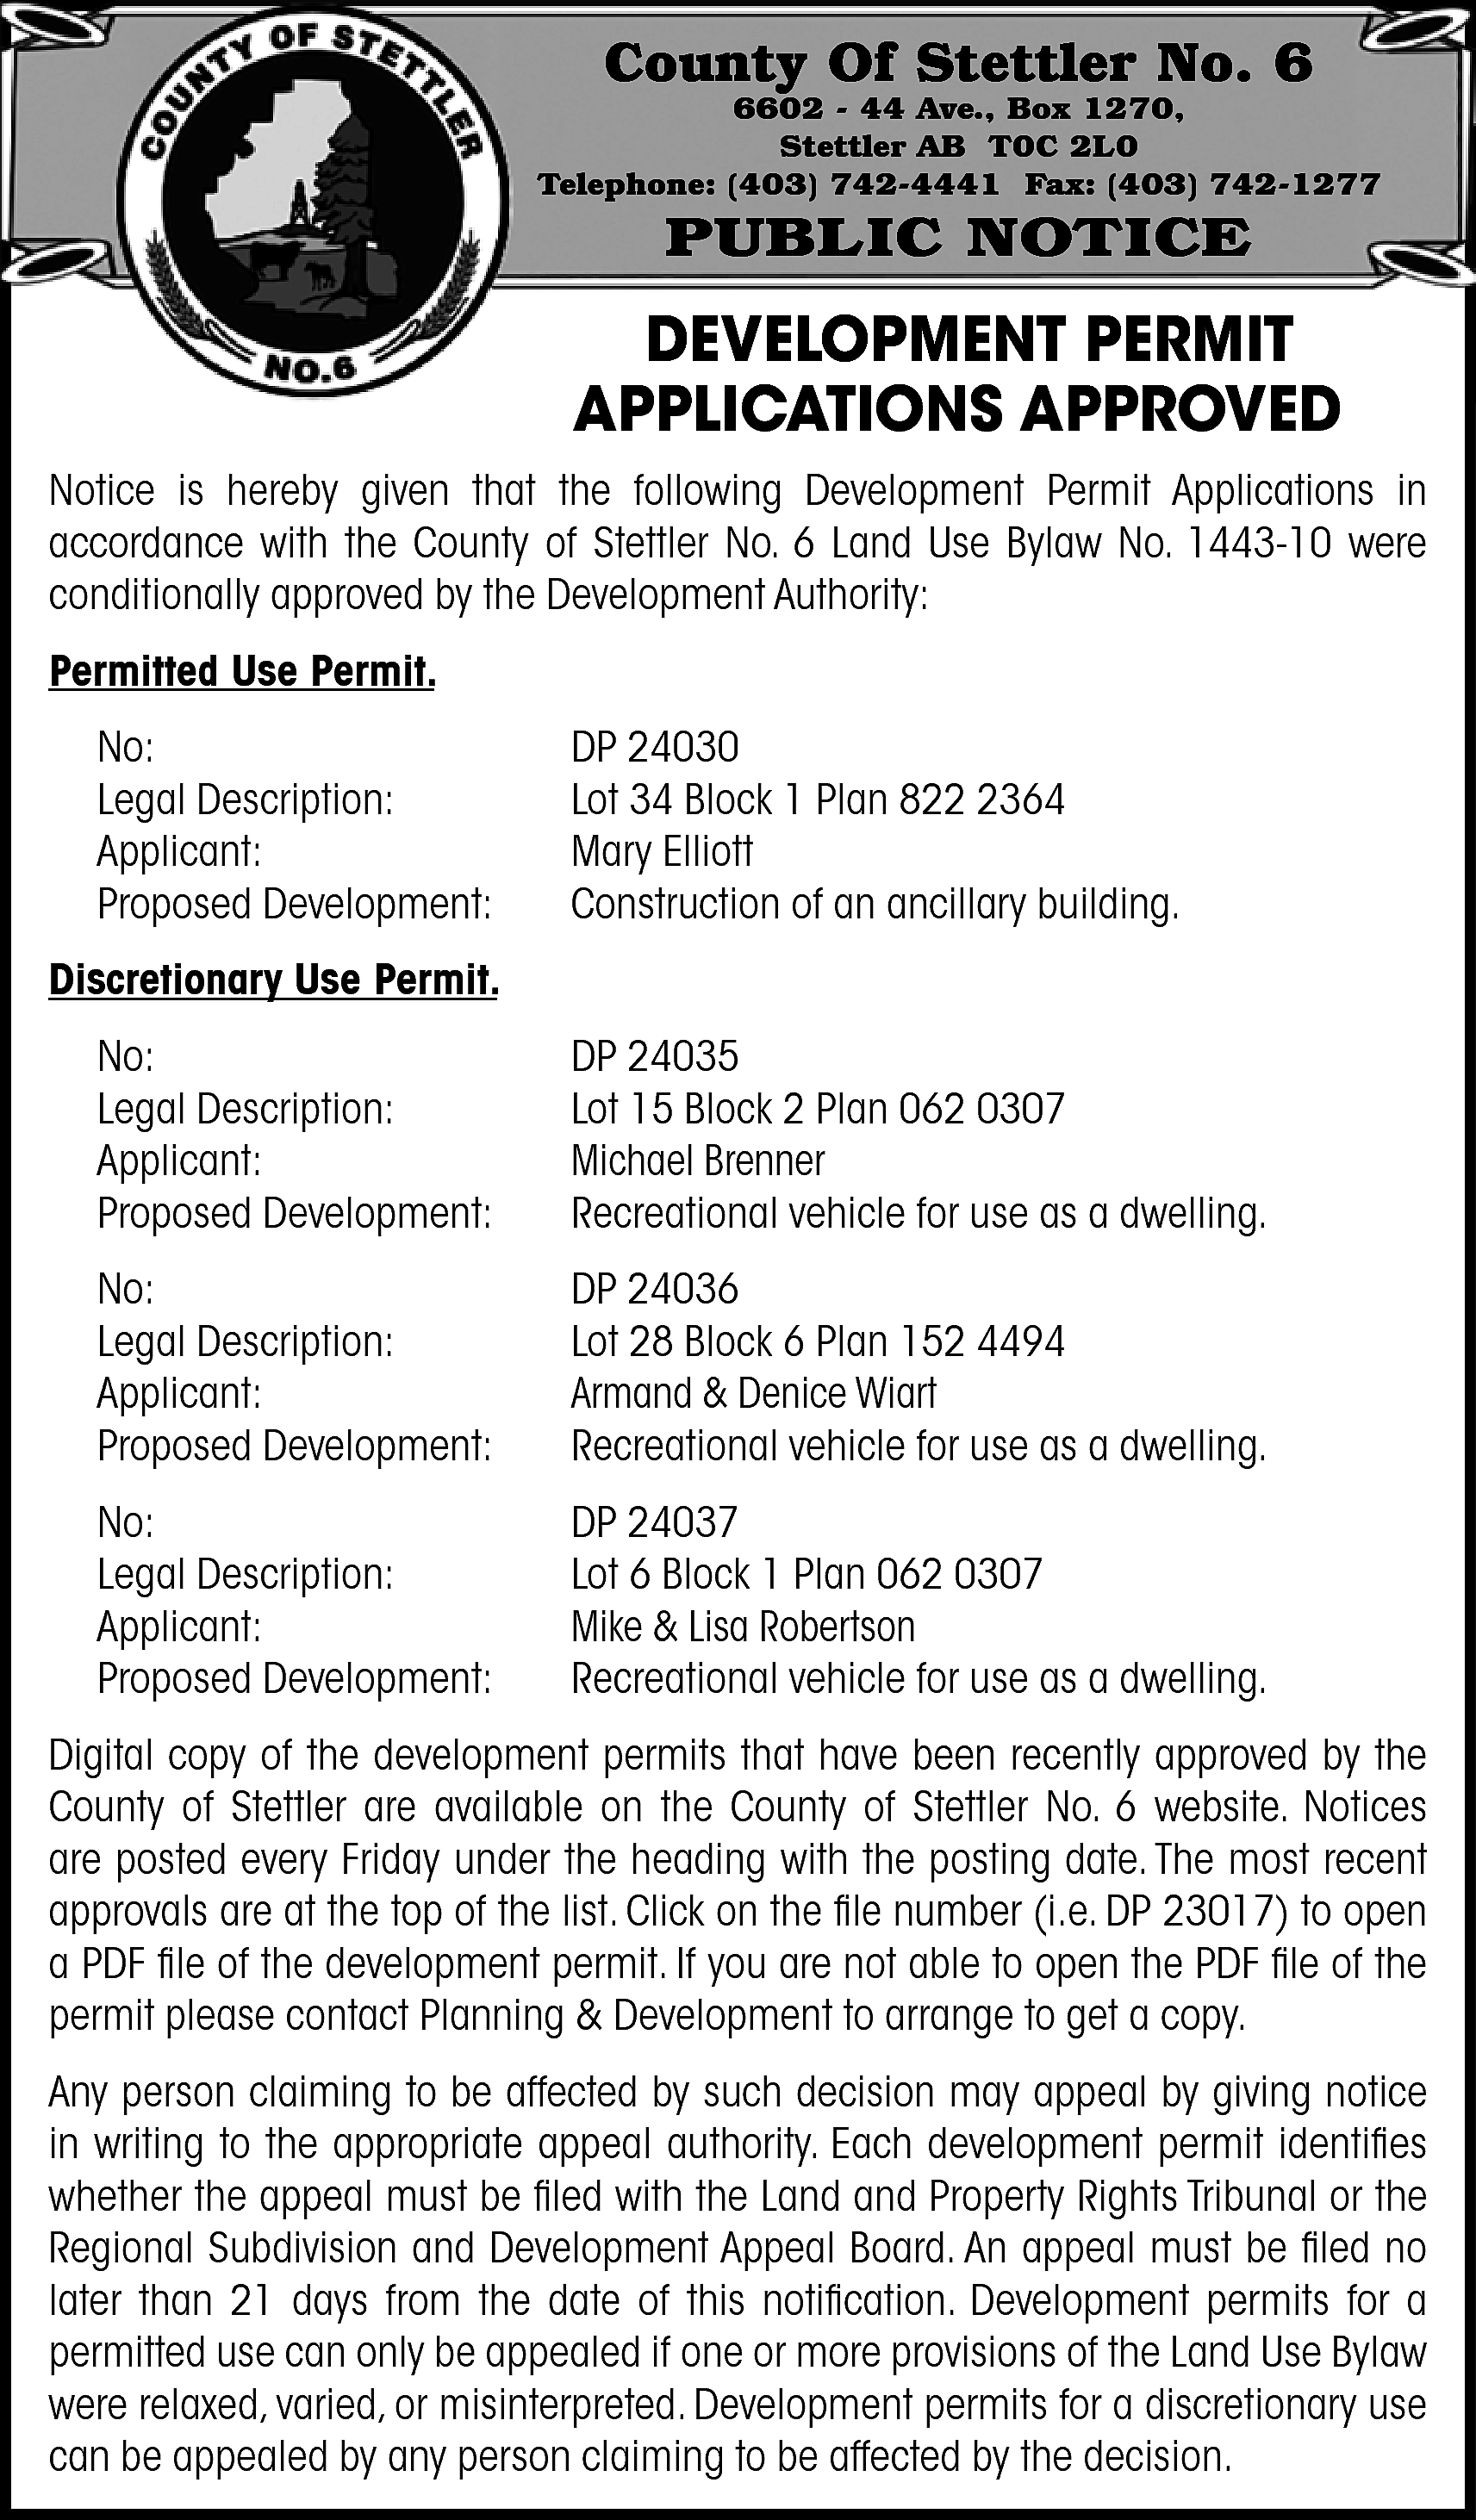 County Of Stettler No. 6  County Of Stettler No. 6    6602 - 44 Ave., Box 1270,  Stettler AB T0C 2L0  Telephone: (403) 742-4441 Fax: (403) 742-1277    PUBLIC NOTICE    DEVELOPMENT PERMIT  APPLICATIONS APPROVED  Notice is hereby given that the following Development Permit Applications in  accordance with the County of Stettler No. 6 Land Use Bylaw No. 1443-10 were  conditionally approved by the Development Authority:  Permitted Use Permit.  No:  Legal Description:  Applicant:  Proposed Development:    DP 24030  Lot 34 Block 1 Plan 822 2364  Mary Elliott  Construction of an ancillary building.    Discretionary Use Permit.  No:  Legal Description:  Applicant:  Proposed Development:    DP 24035  Lot 15 Block 2 Plan 062 0307  Michael Brenner  Recreational vehicle for use as a dwelling.    No:  Legal Description:  Applicant:  Proposed Development:    DP 24036  Lot 28 Block 6 Plan 152 4494  Armand & Denice Wiart  Recreational vehicle for use as a dwelling.    No:  Legal Description:  Applicant:  Proposed Development:    DP 24037  Lot 6 Block 1 Plan 062 0307  Mike & Lisa Robertson  Recreational vehicle for use as a dwelling.    Digital copy of the development permits that have been recently approved by the  County of Stettler are available on the County of Stettler No. 6 website. Notices  are posted every Friday under the heading with the posting date. The most recent  approvals are at the top of the list. Click on the file number (i.e. DP 23017) to open  a PDF file of the development permit. If you are not able to open the PDF file of the  permit please contact Planning & Development to arrange to get a copy.  Any person claiming to be affected by such decision may appeal by giving notice  in writing to the appropriate appeal authority. Each development permit identifies  whether the appeal must be filed with the Land and Property Rights Tribunal or the  Regional Subdivision and Development Appeal Board. An appeal must be filed no  later than 21 days from the date of this notification. Development permits for a  permitted use can only be appealed if one or more provisions of the Land Use Bylaw  were relaxed, varied, or misinterpreted. Development permits for a discretionary use  can be appealed by any person claiming to be affected by the decision.    